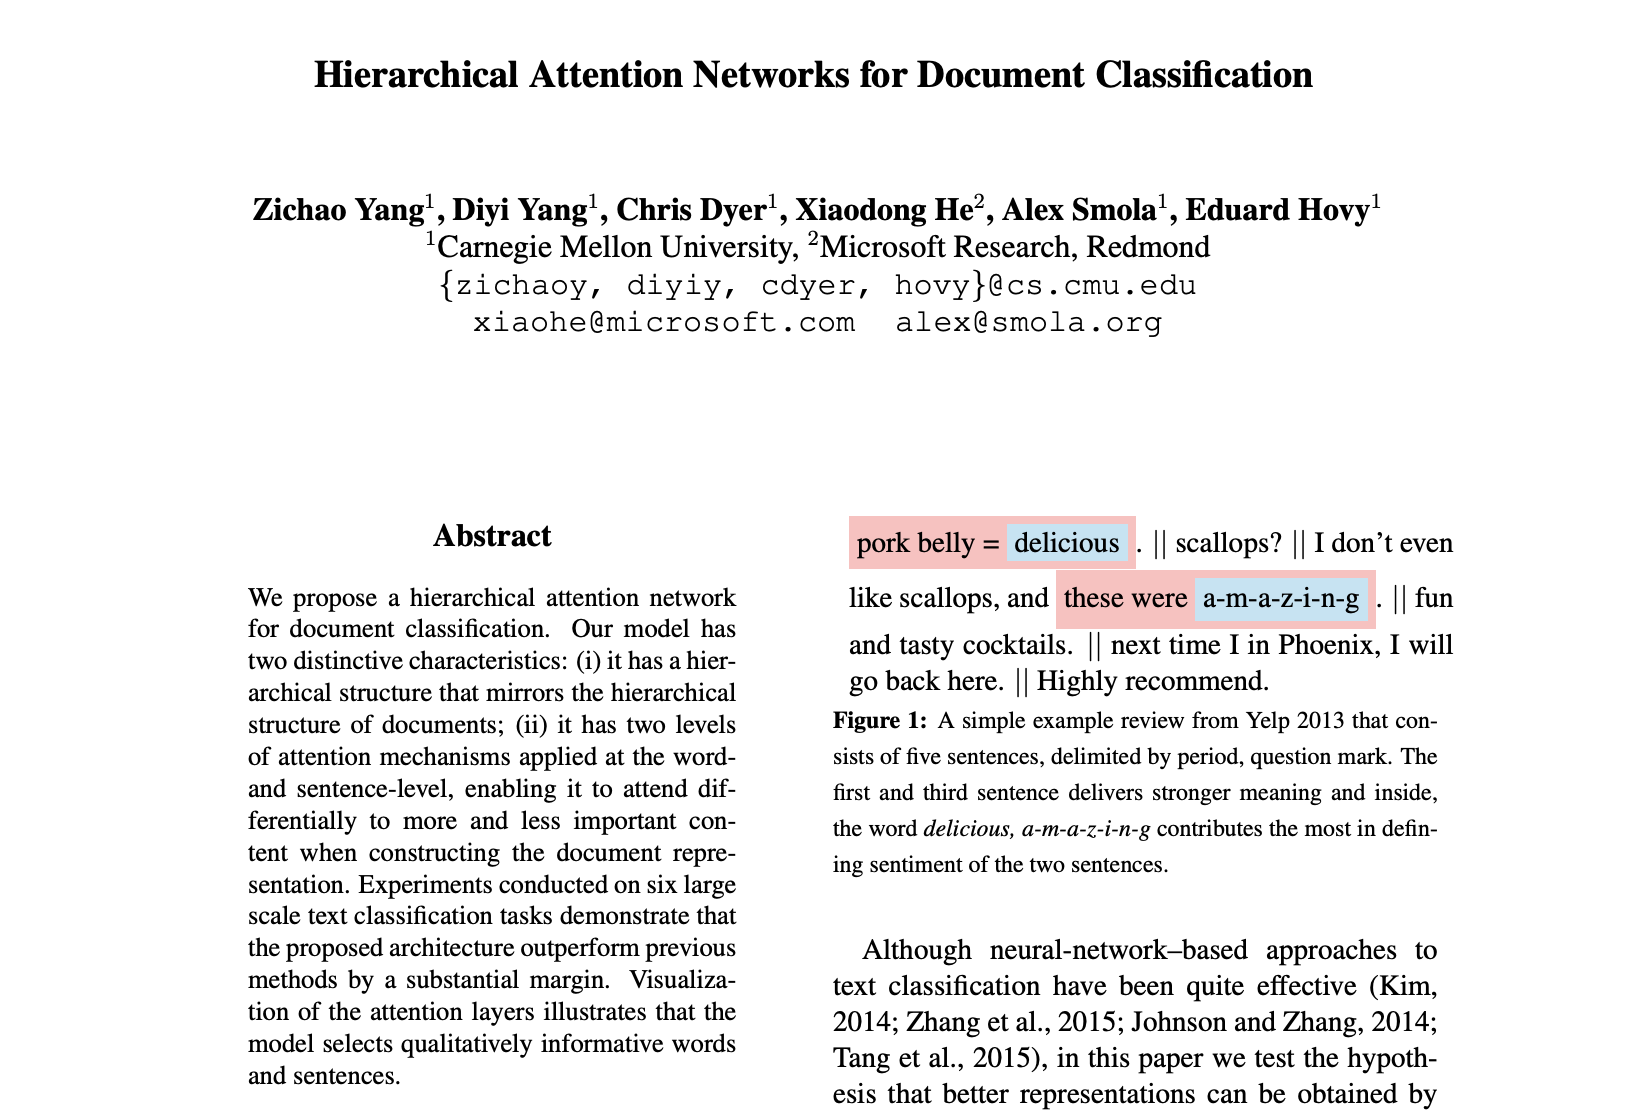 Paper on Hierarchical Attention Networks for Document Classification